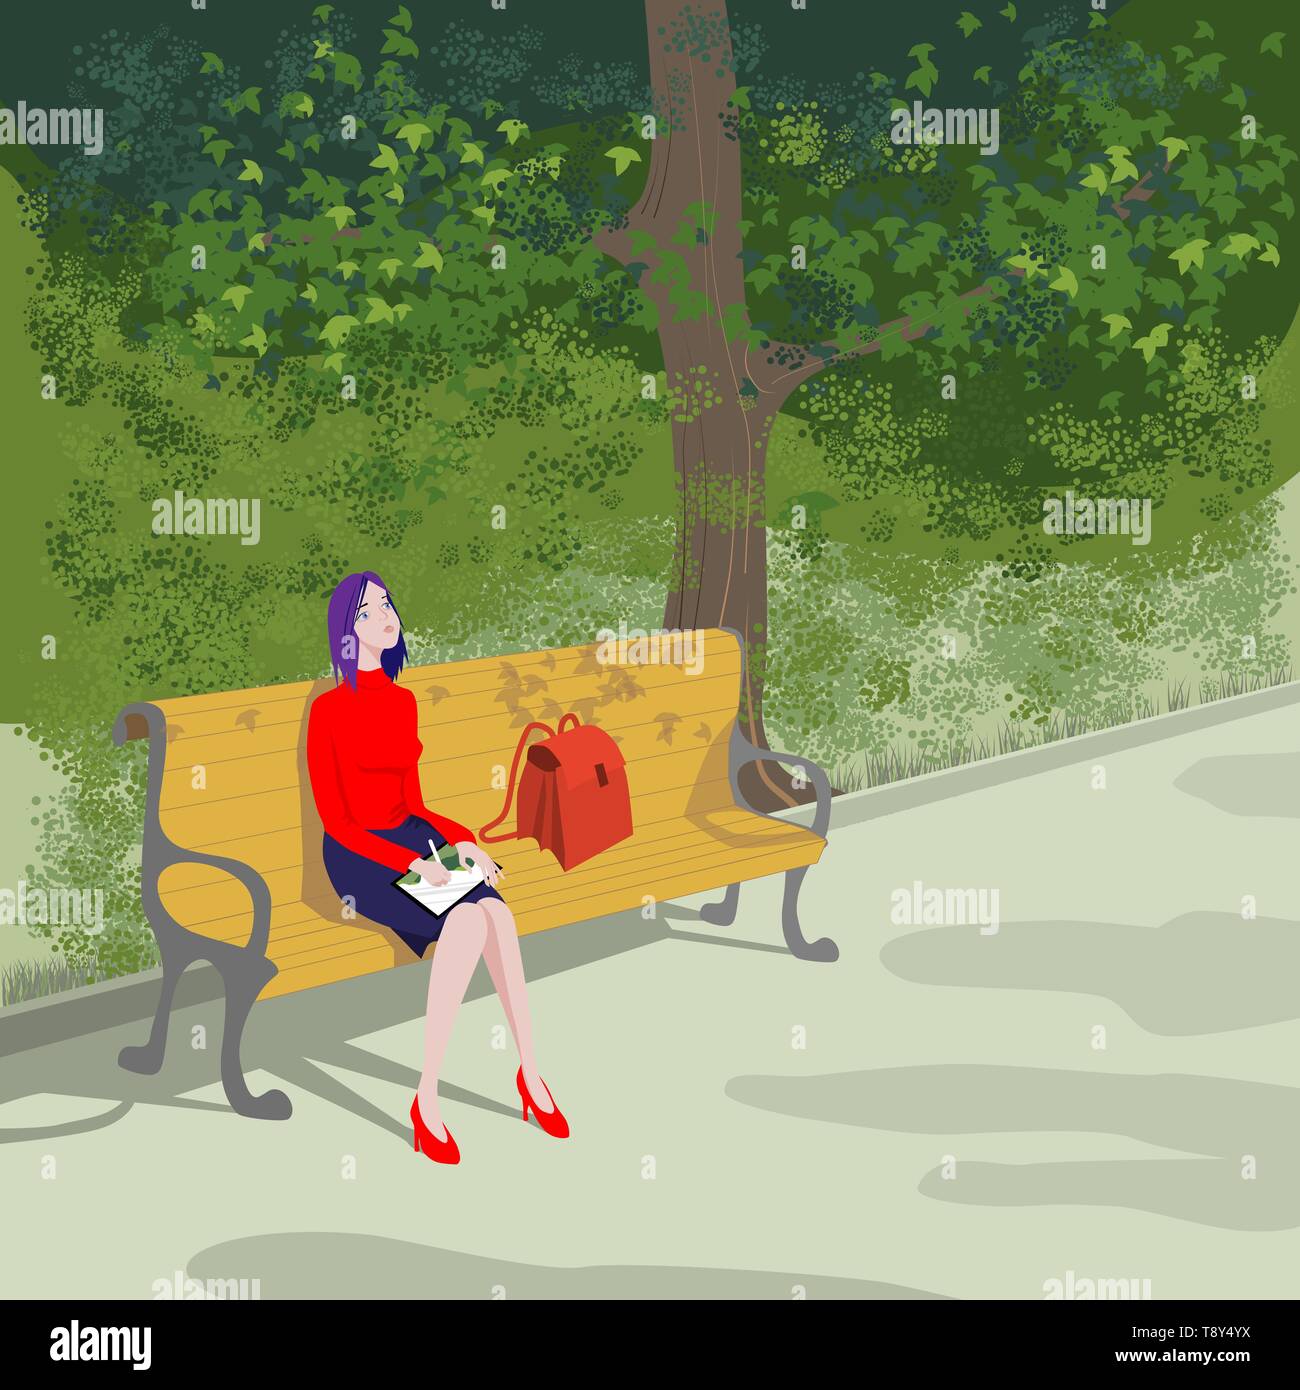 Girl on a park bench draws in a computer tablet. Trees, bushes and green grass on the alley in the garden. Vector illustration Stock Vector